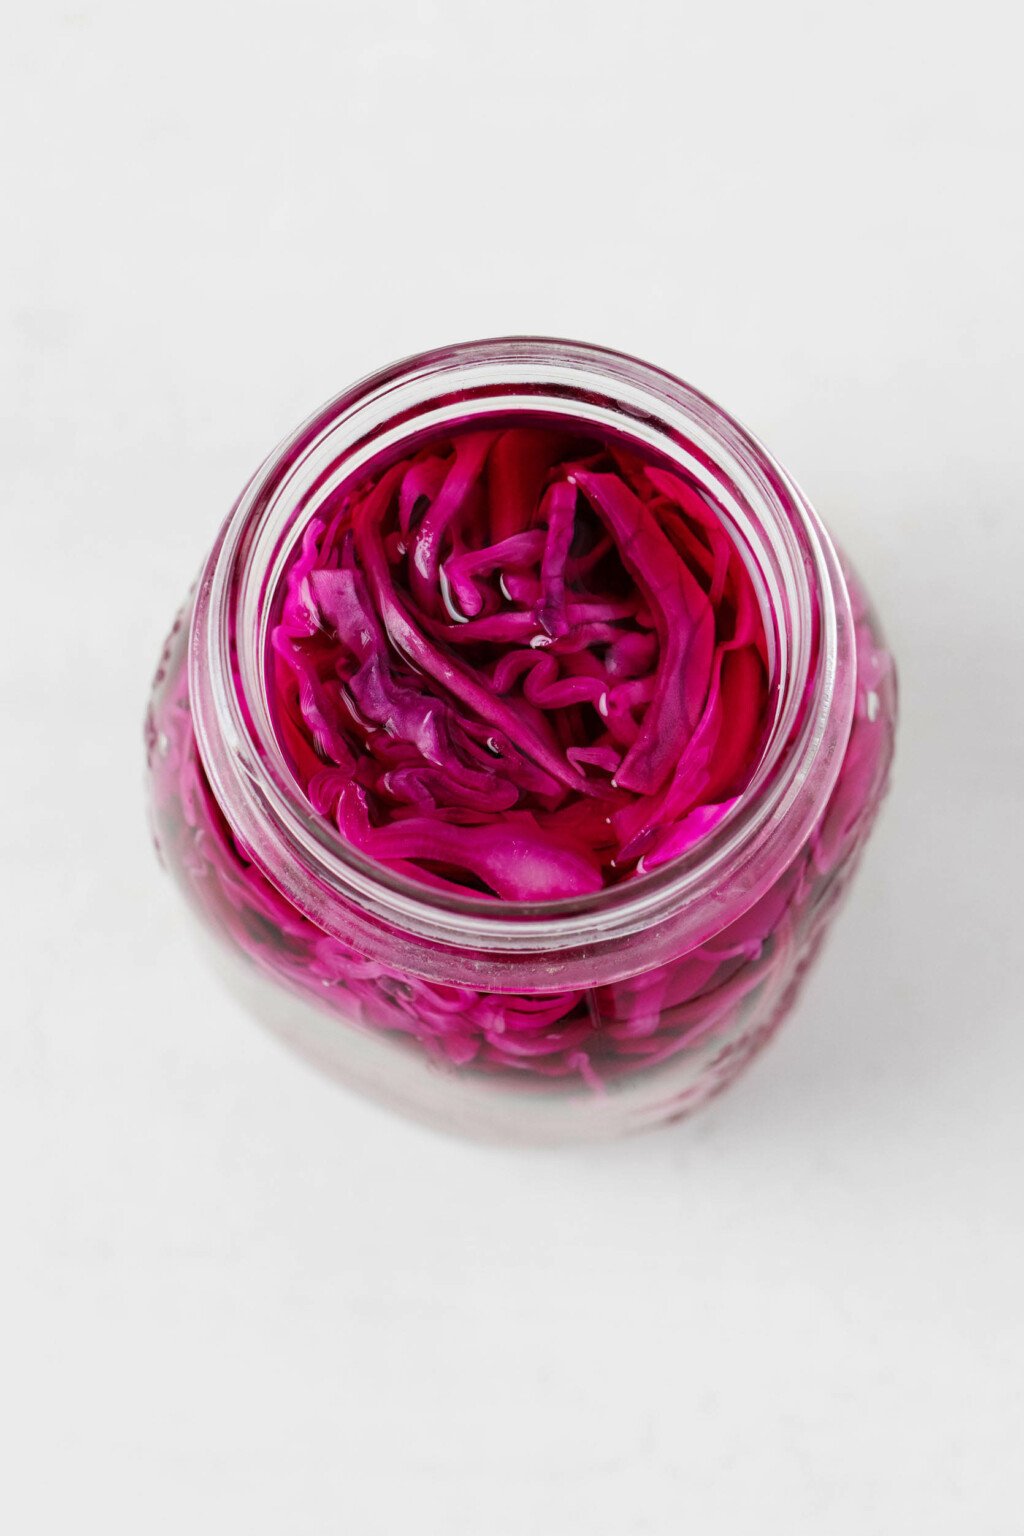 An image of a large, white mason jar, which has been filled with shredded red cabbage in a brine. It rests on a white surface.